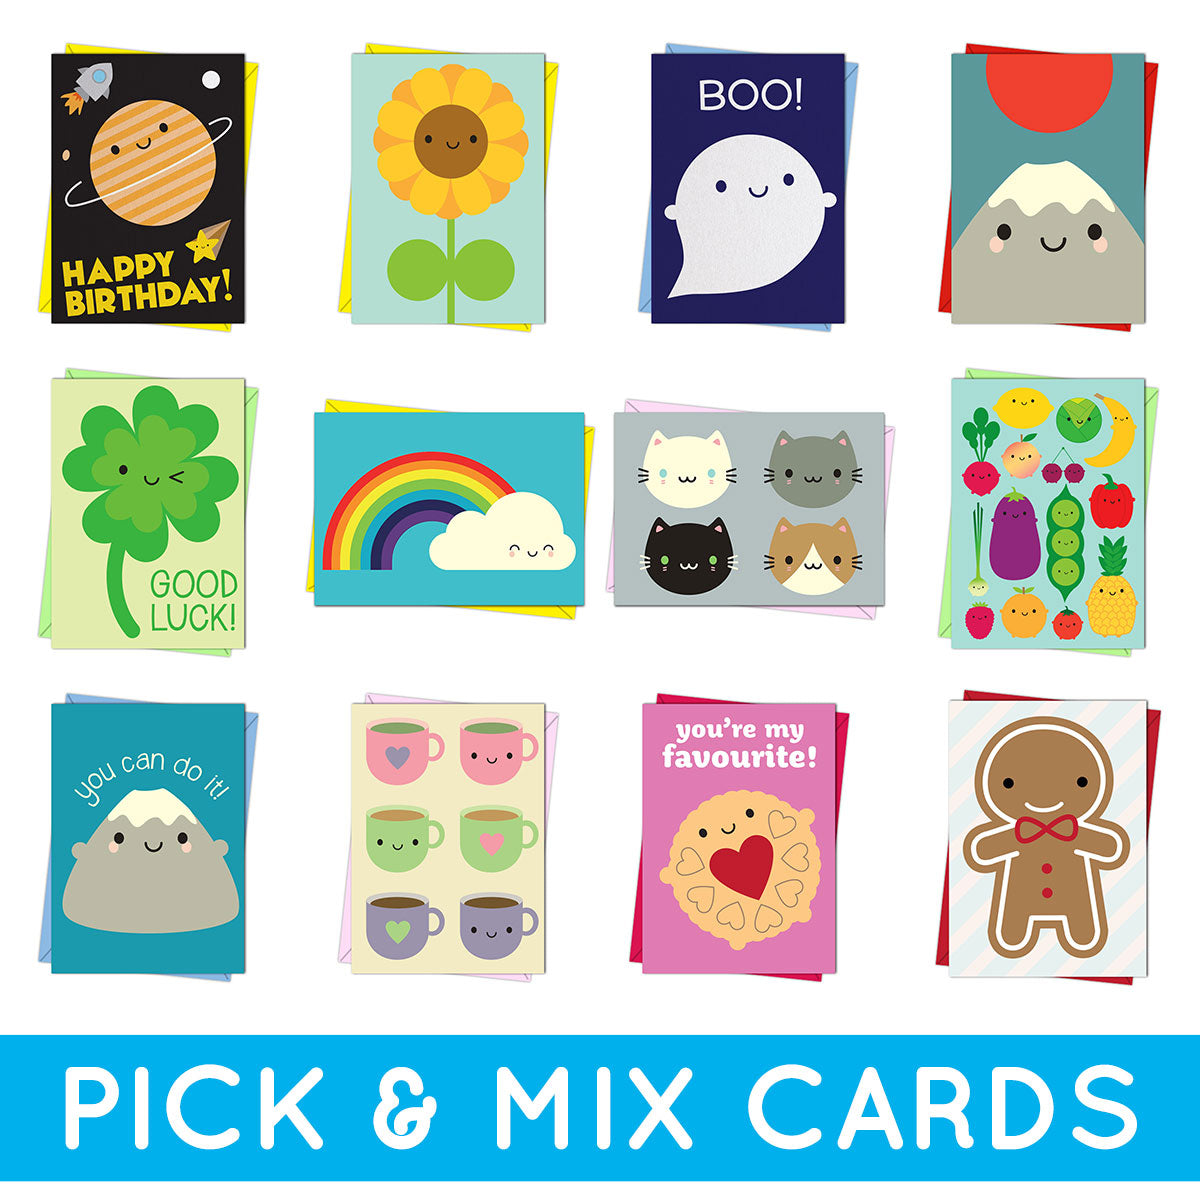 Pick & Mix Cards